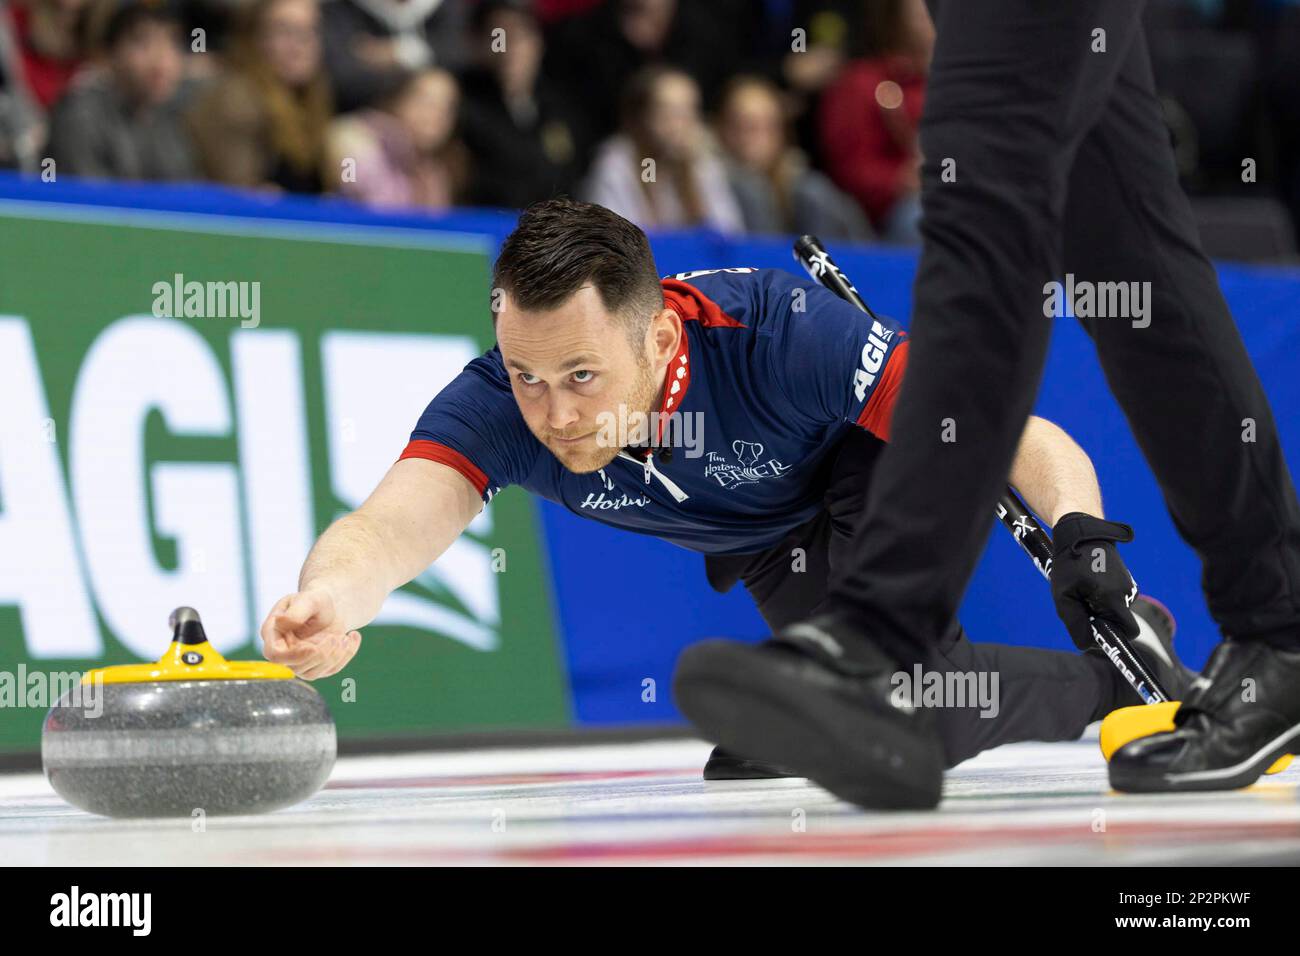 Wild Card second Connor Njegovan makes a shot against Northern Ontario during the Tim Hortons Brier curling event Saturday, March 4, 2023, in London, Ontario